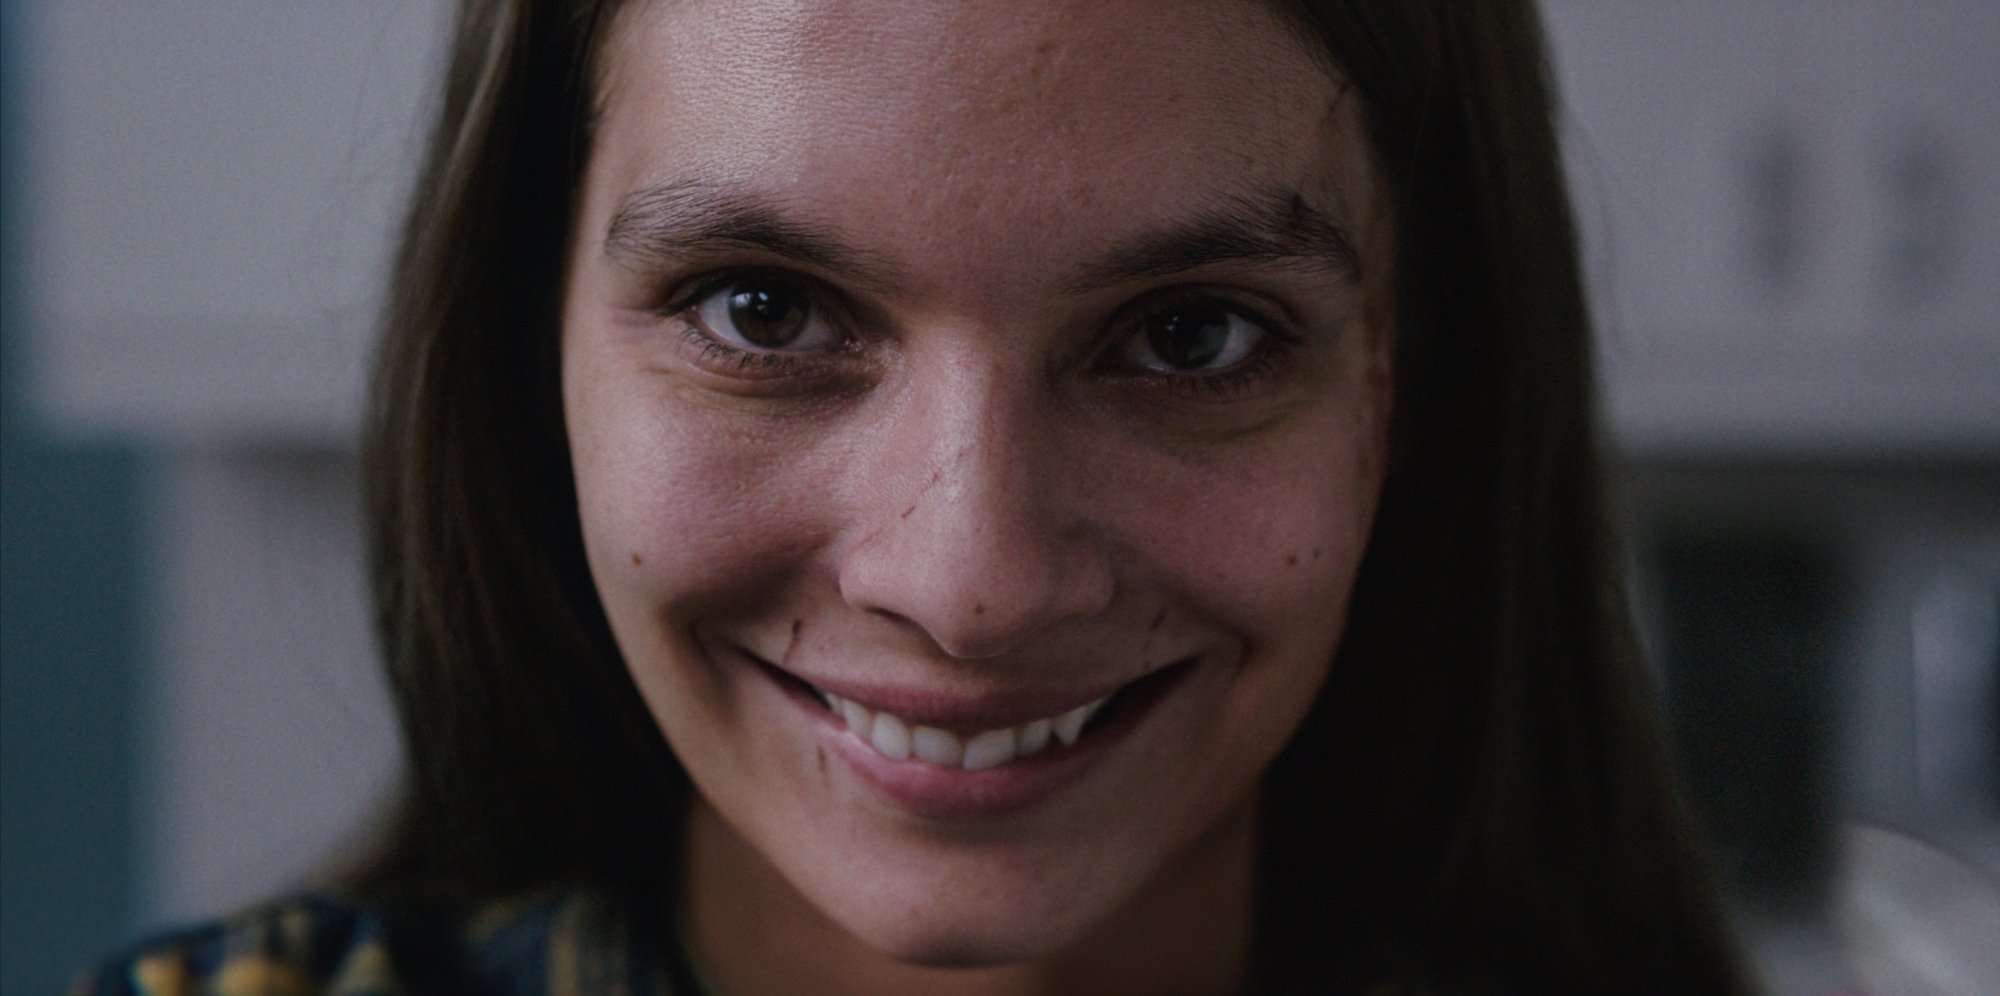 'Smile' Caitlin Stasey as Laura Weaver with a wide smile on her face